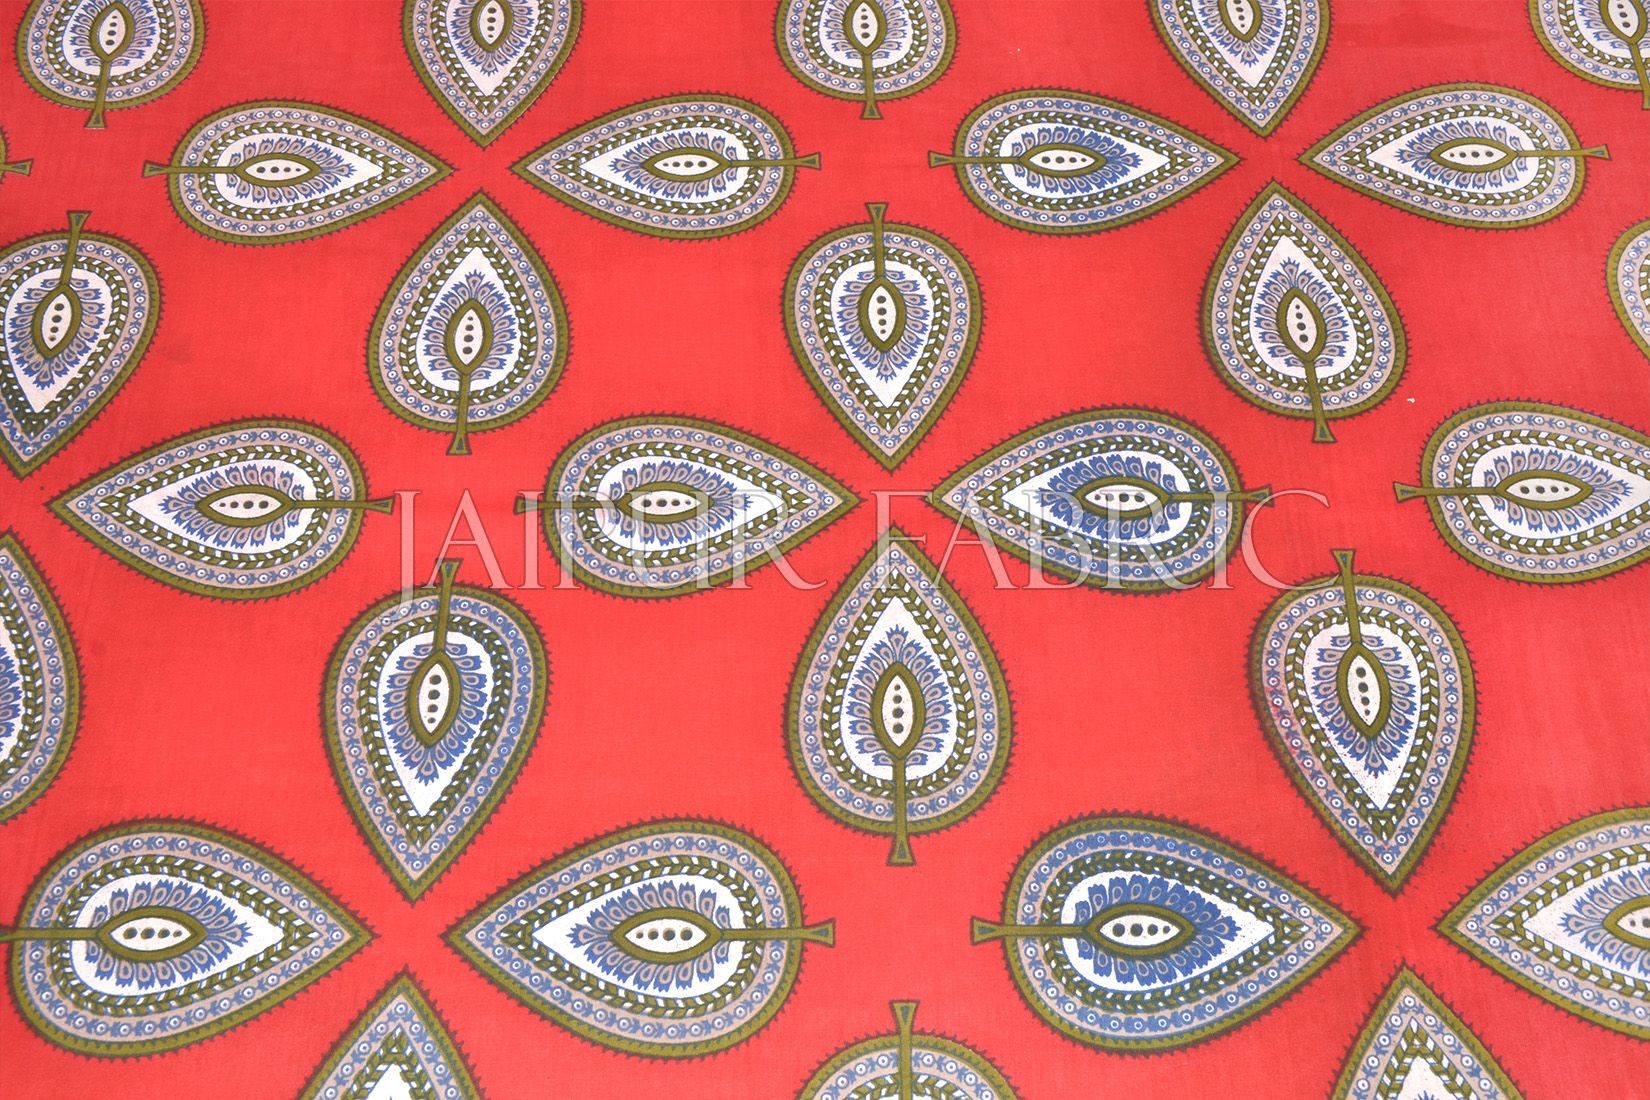 Red Color Jaipuri Paan Patti Print Double Bed Sheet